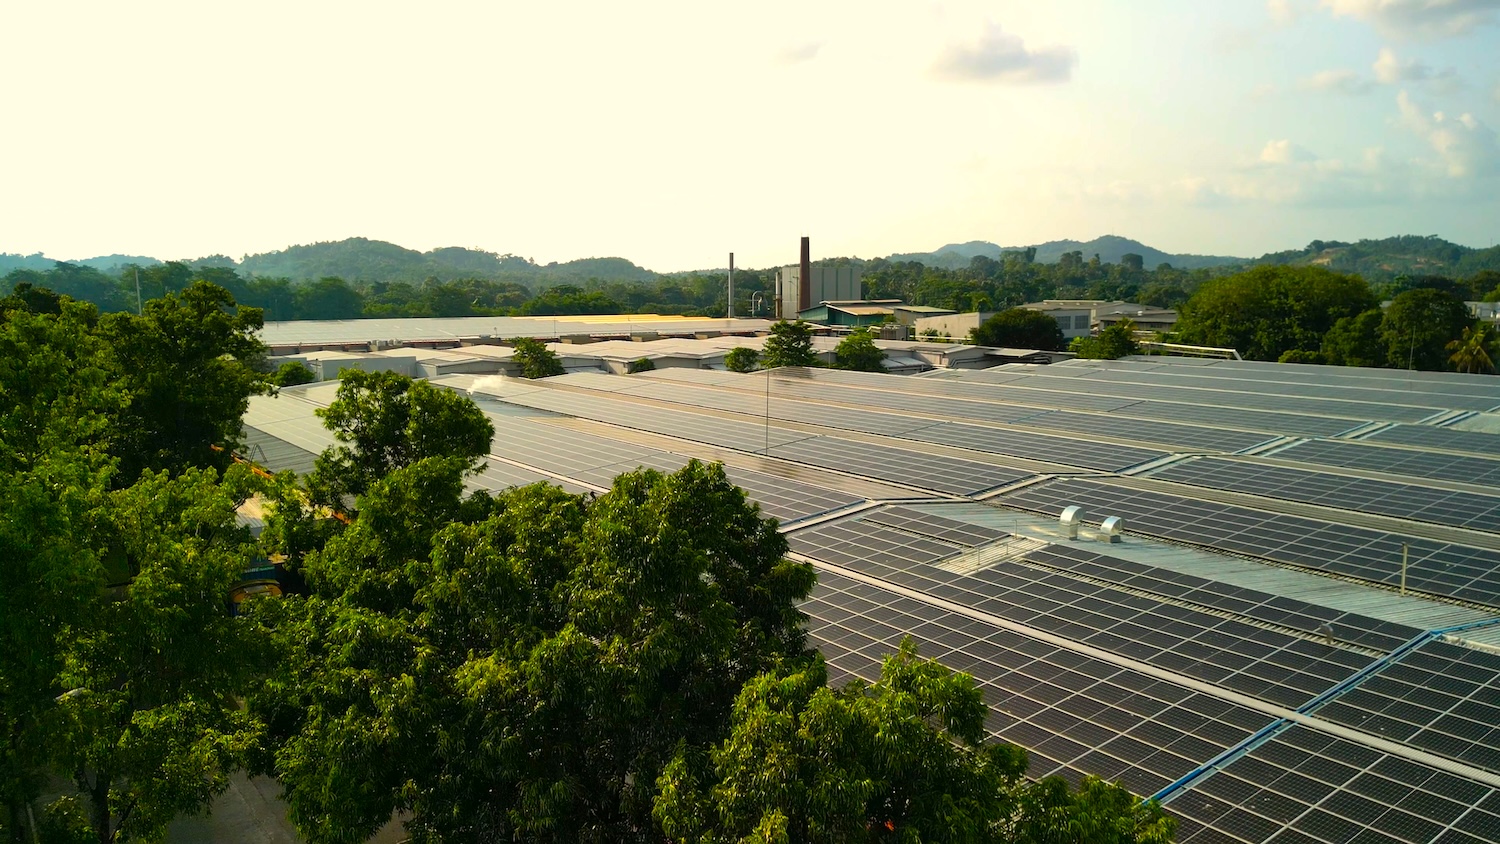 MAS’ new solar capacity will save approximately 18,000 Tons of Carbon Dioxide (CO2) each year and covers an area equivalent to 10 cricket grounds with the capacity to power approximately 34,000 households.